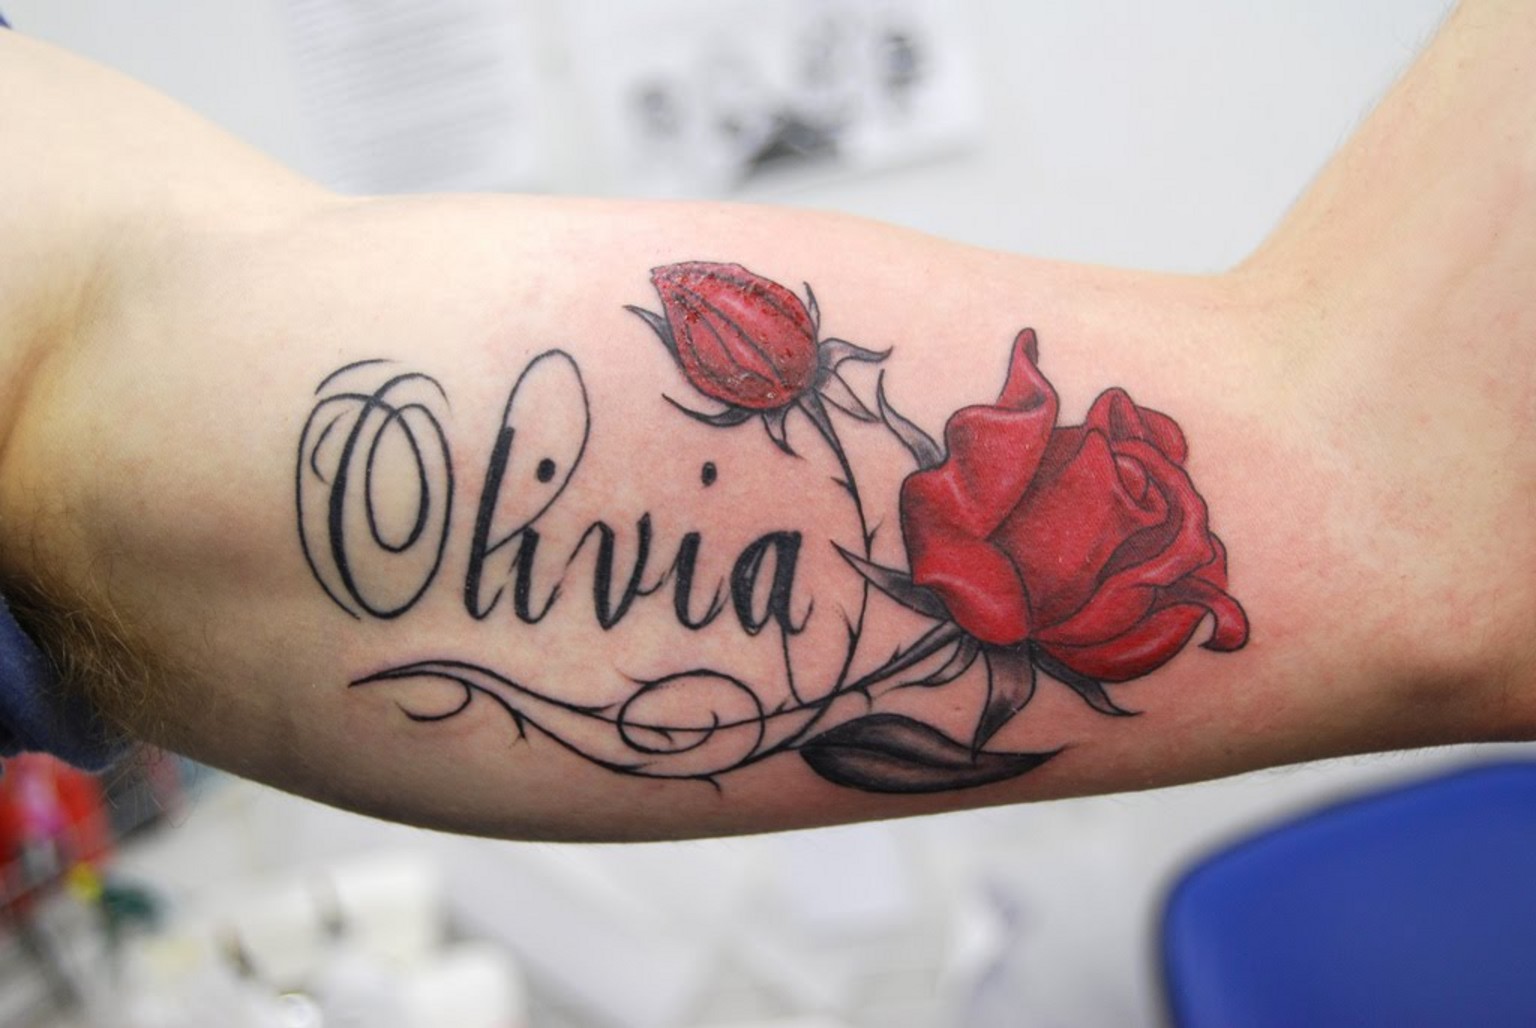 2. How Much Do Name Tattoos Cost? - wide 6